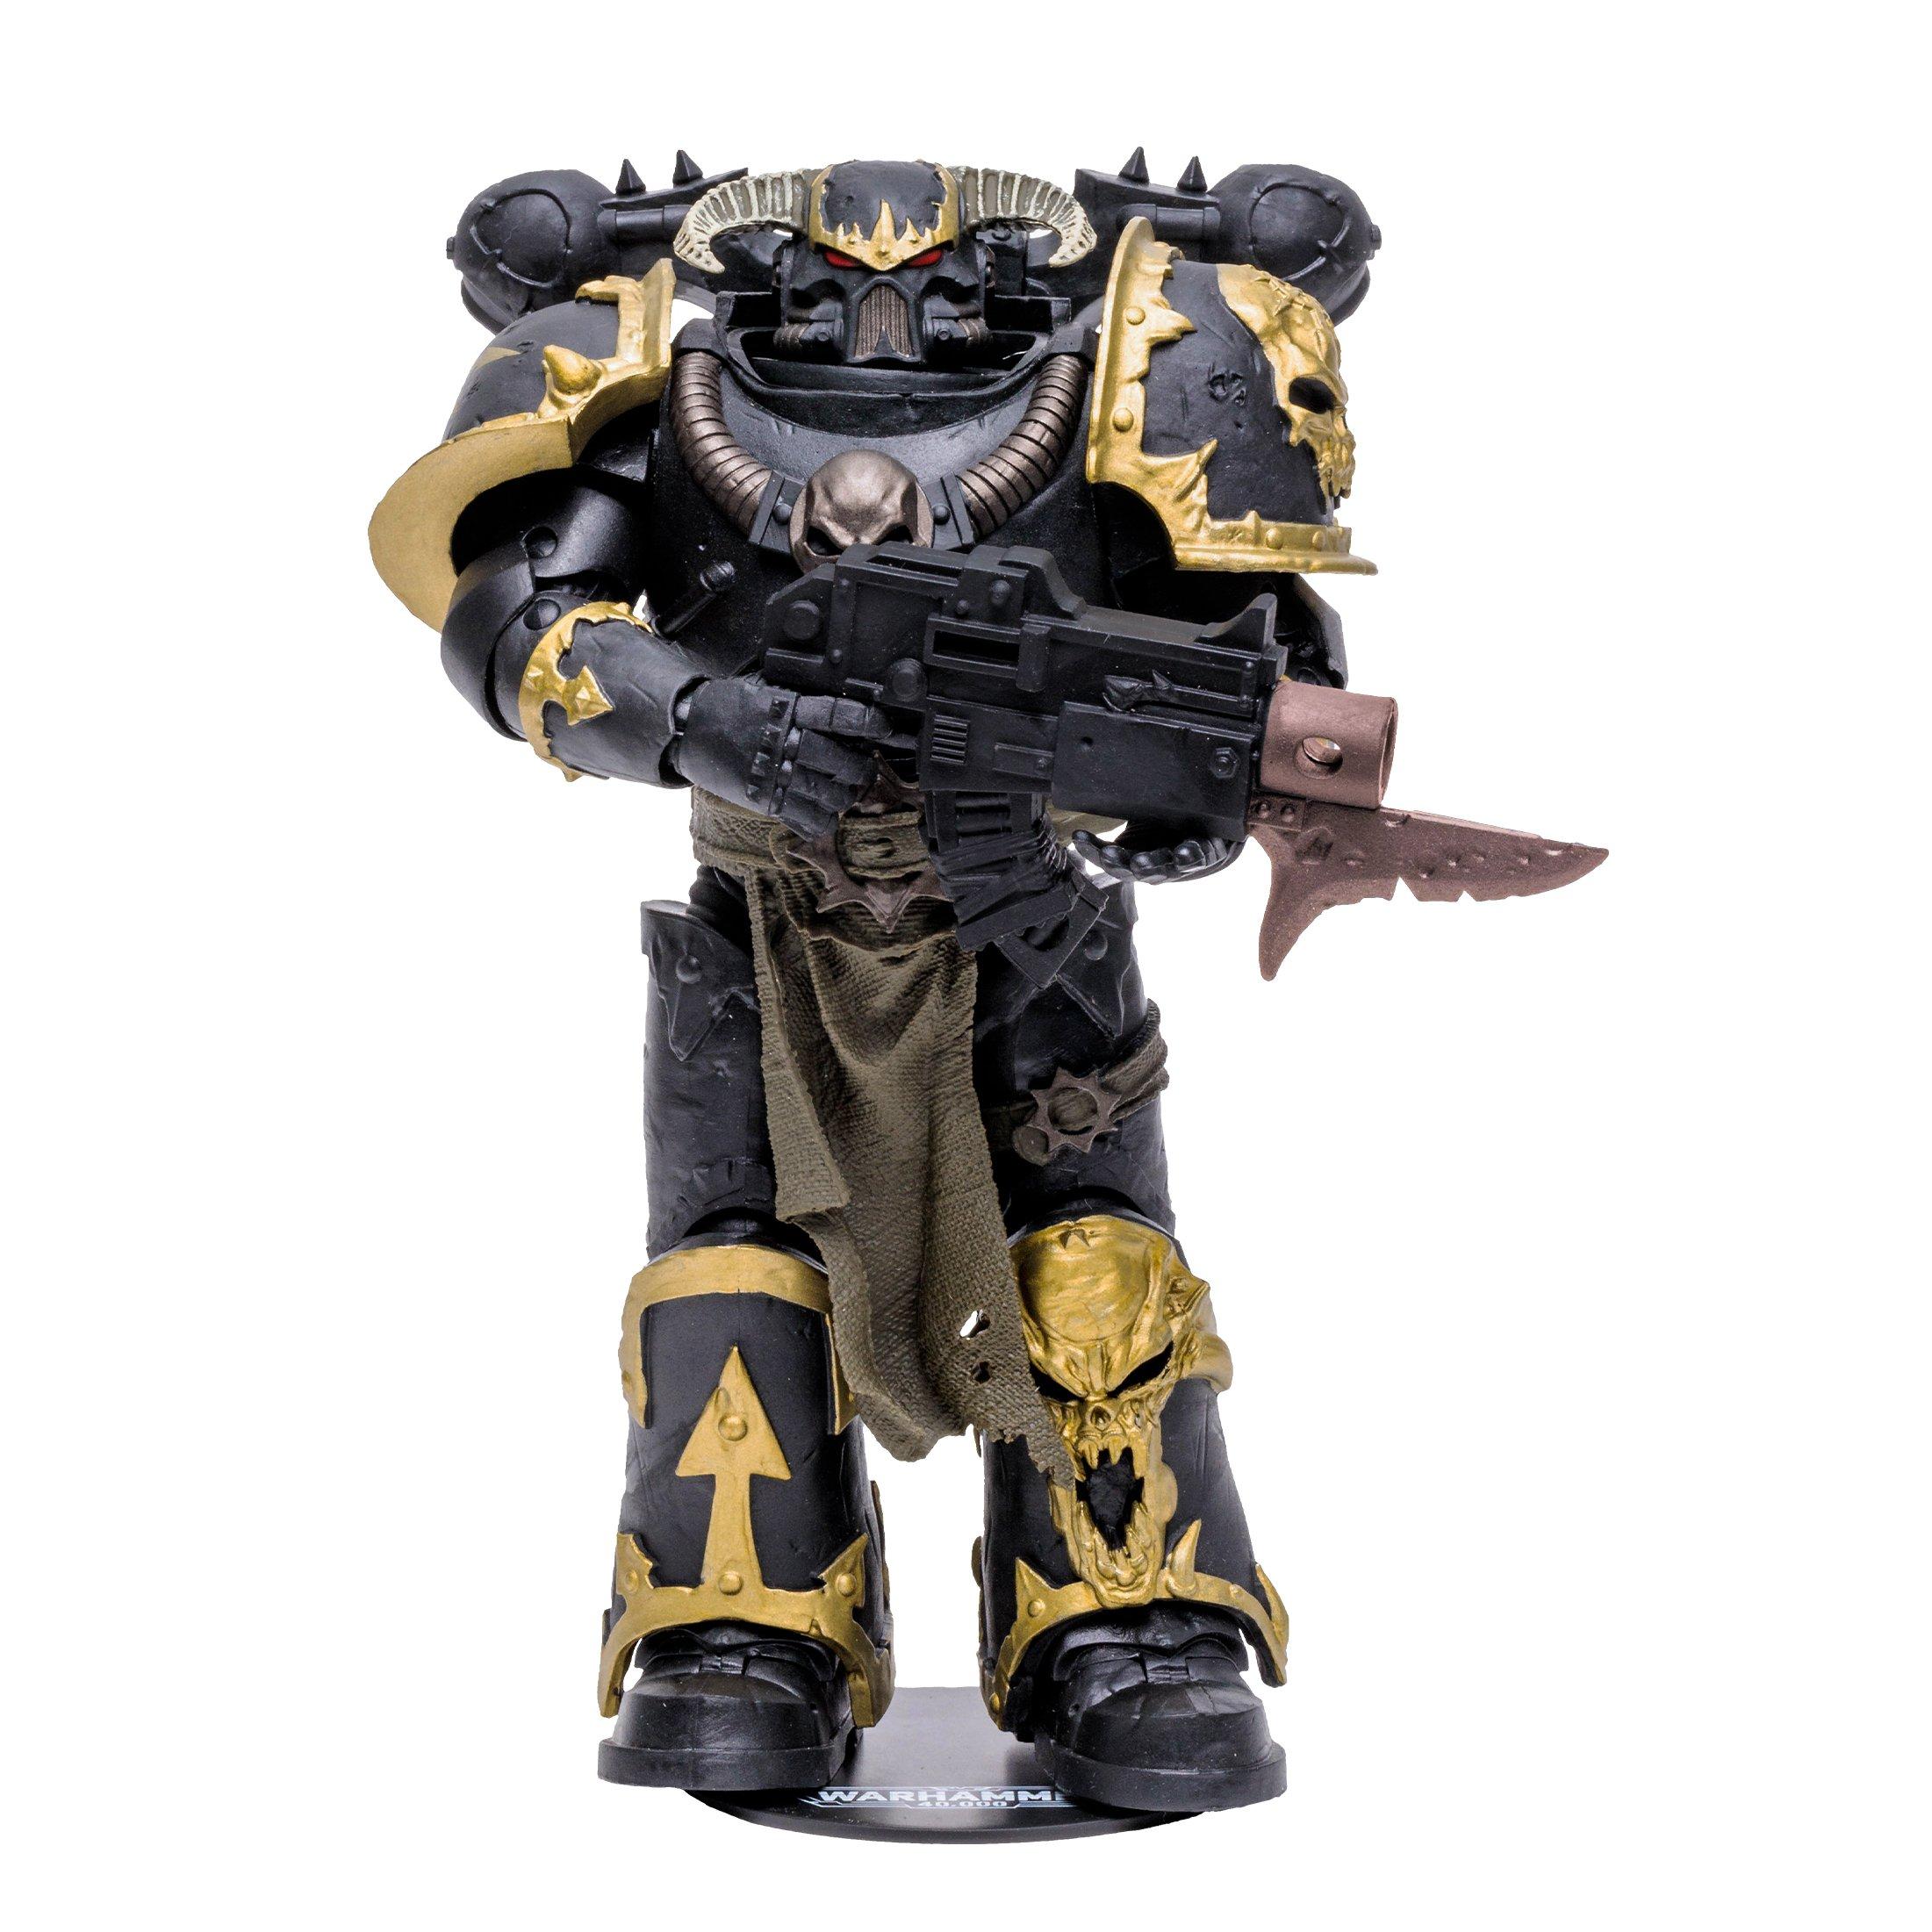 McFarlane Toys Warhammer 40,000 Chaos Space Marine 7-in Scale Action Figure